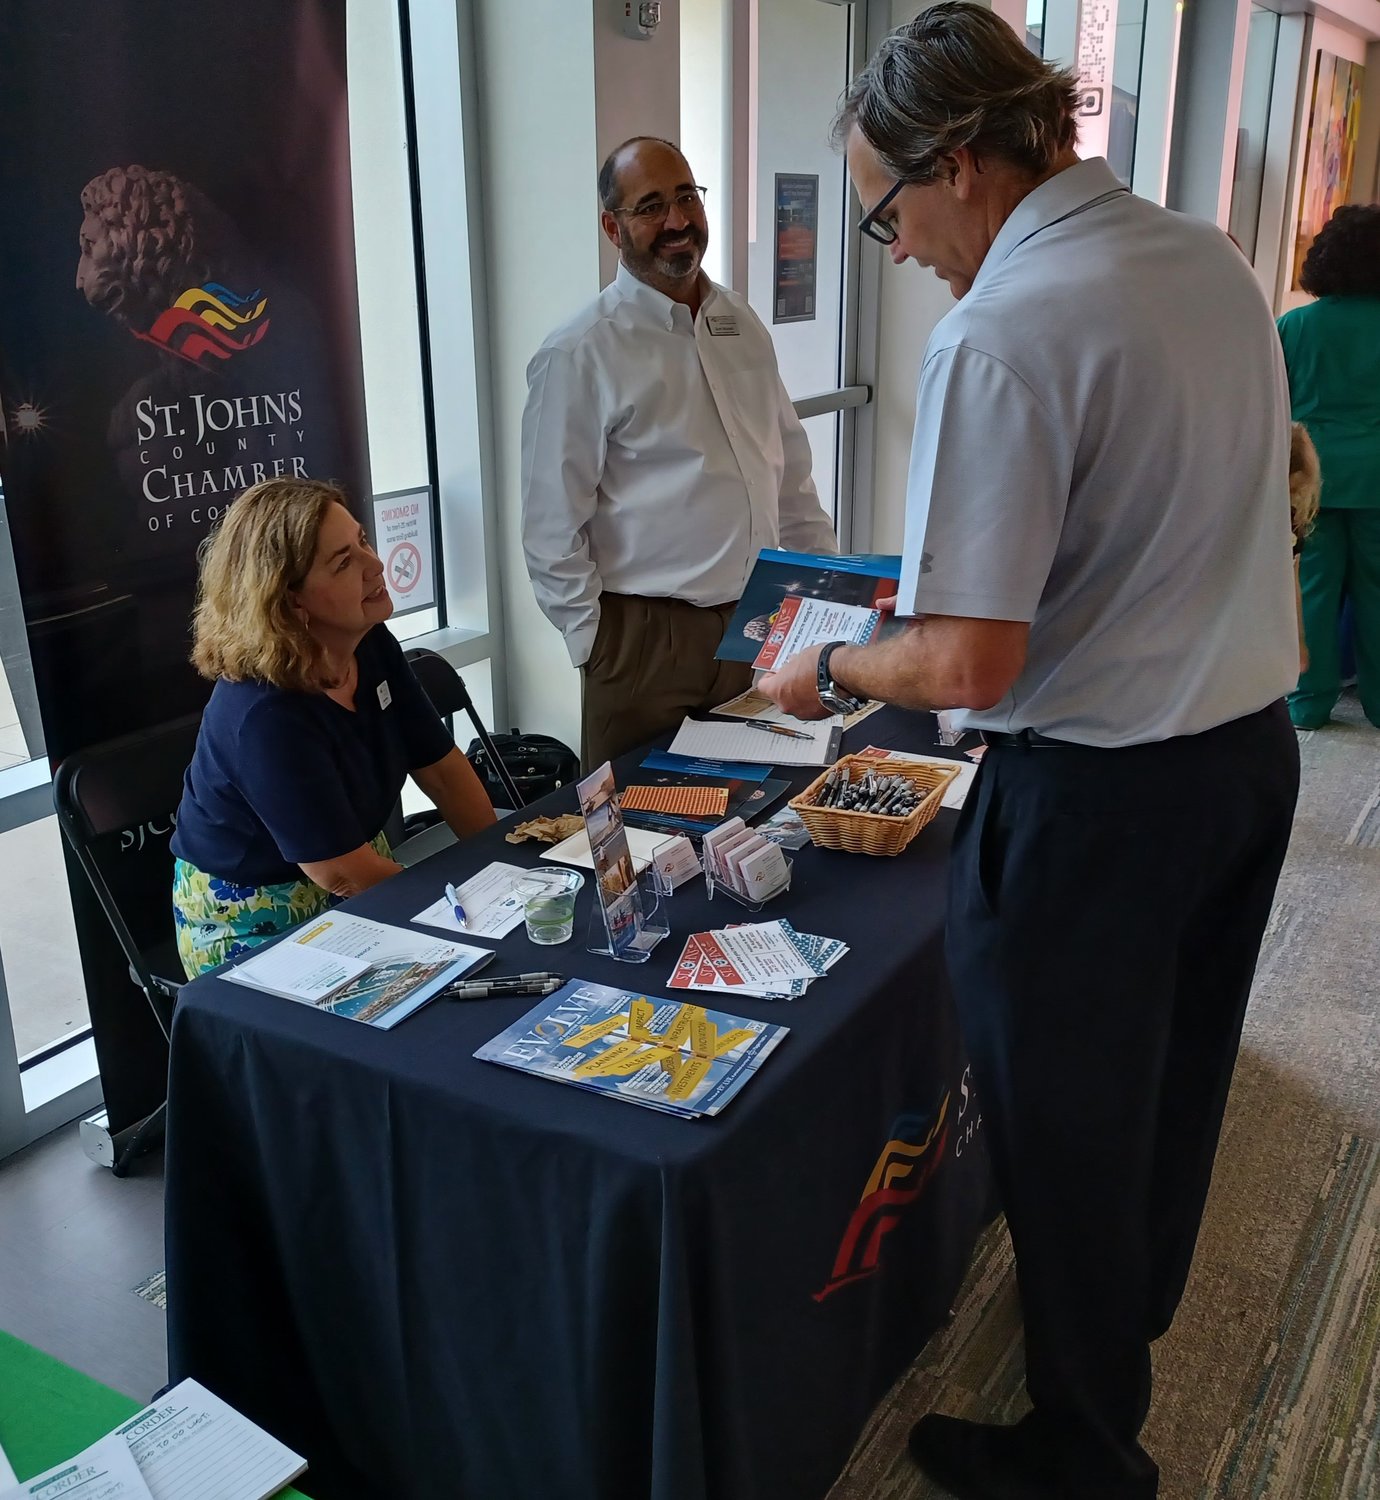 Karen Everett, director of the Ponte Vedra Beach Division of the St. Johns County Chamber of Commerce, and Scott Maynard, director of economic development for the Chamber, meet with members of the public during the link’s Business Expo on Friday, July 15.